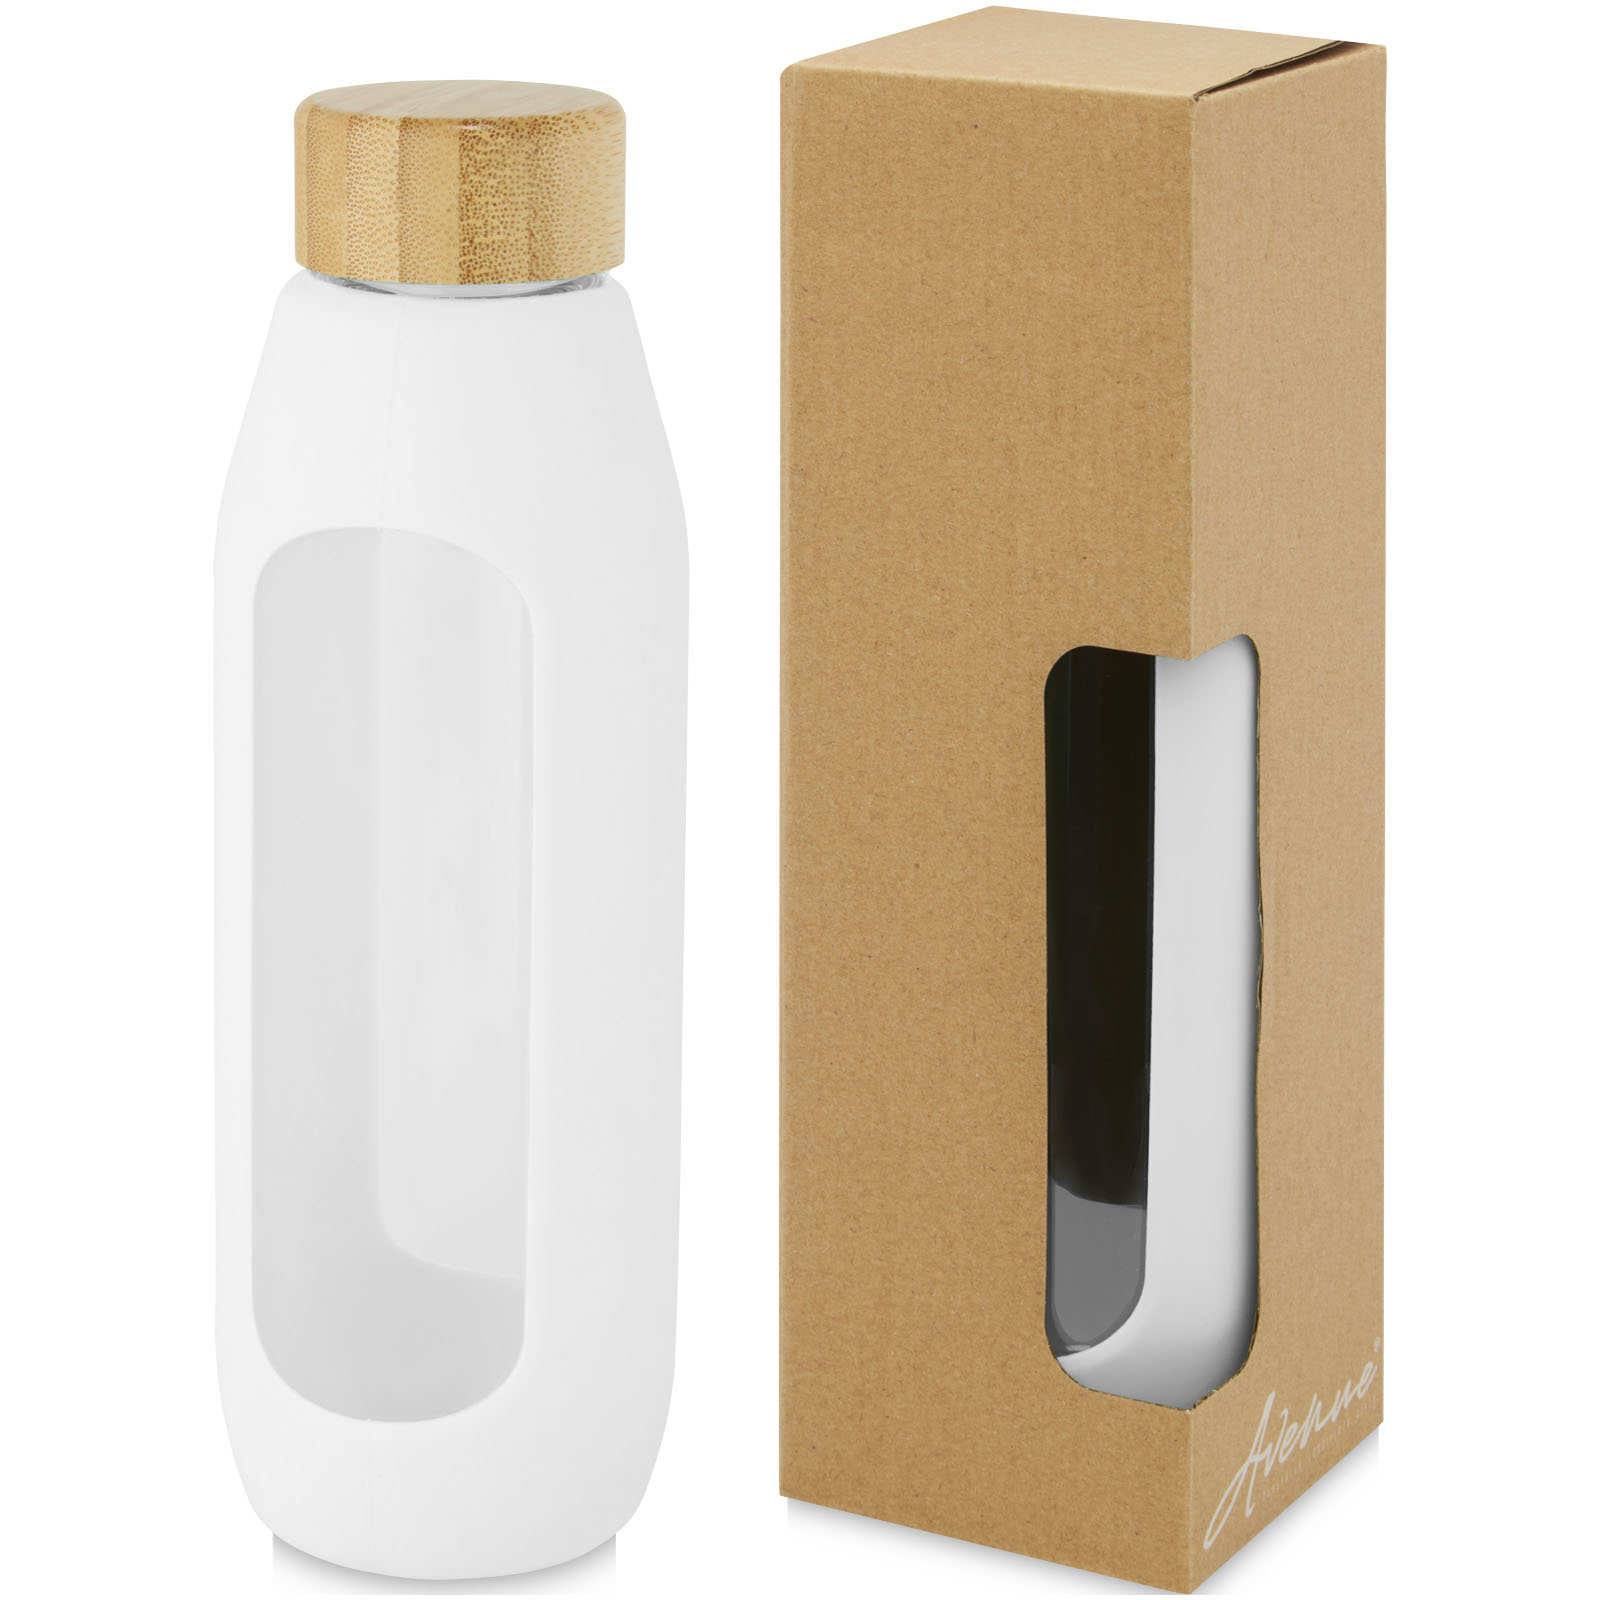 Advertising Water bottles - Tidan 600 ml borosilicate glass bottle with silicone grip